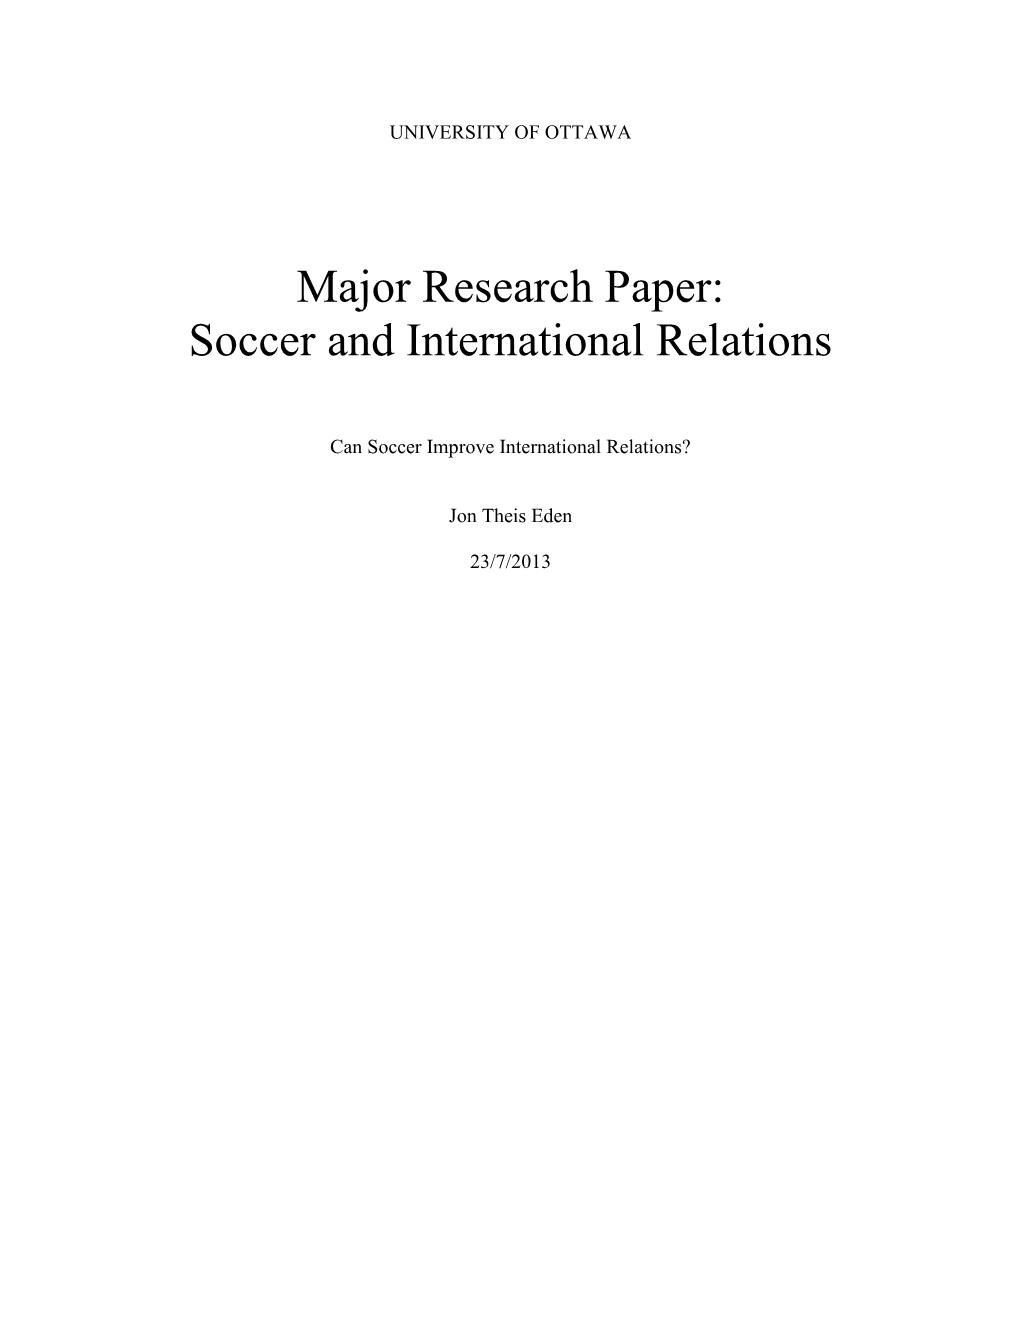 Soccer and International Relations